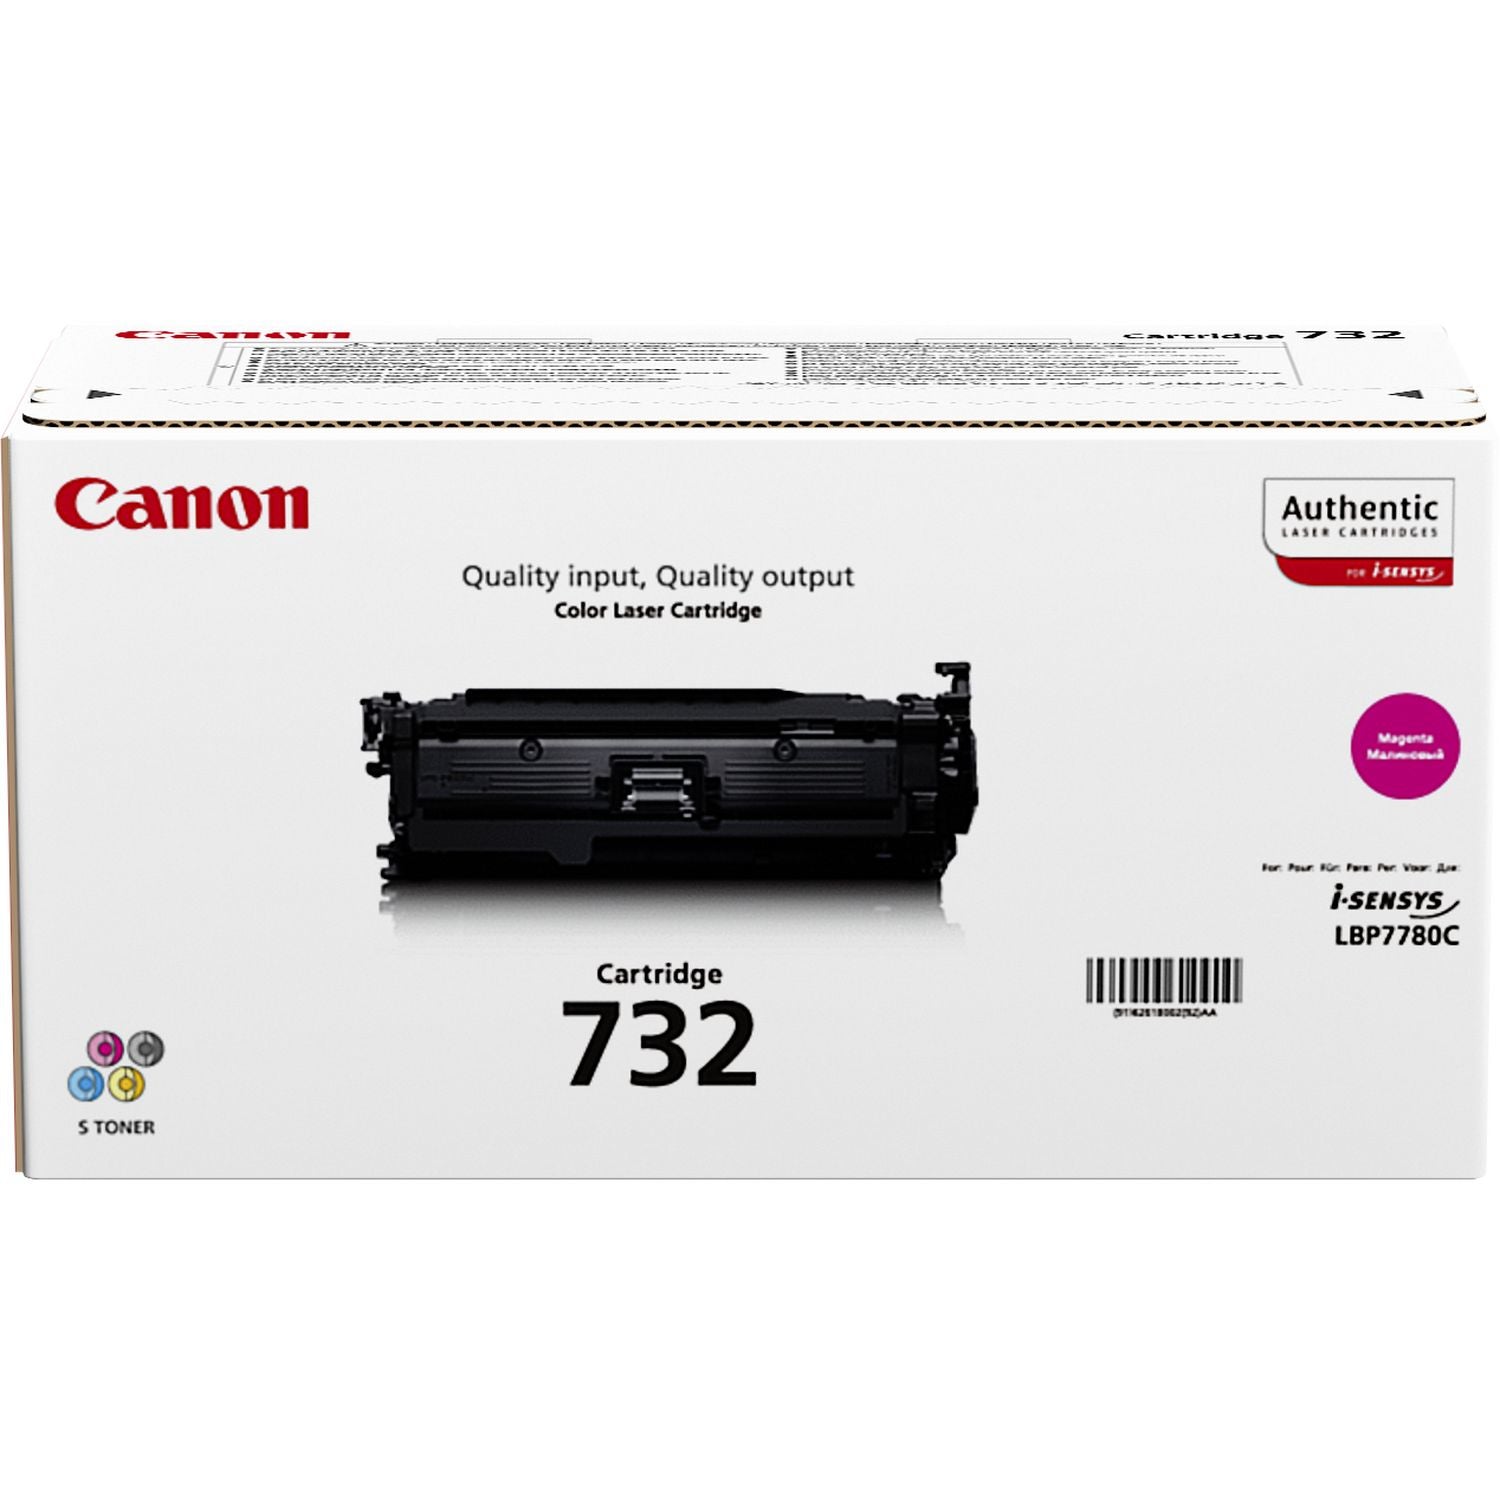 Canon 6261B002/732M Toner cartridge magenta, 6.4K pages ISO/IEC 19798 for Canon LBP-5480/7780